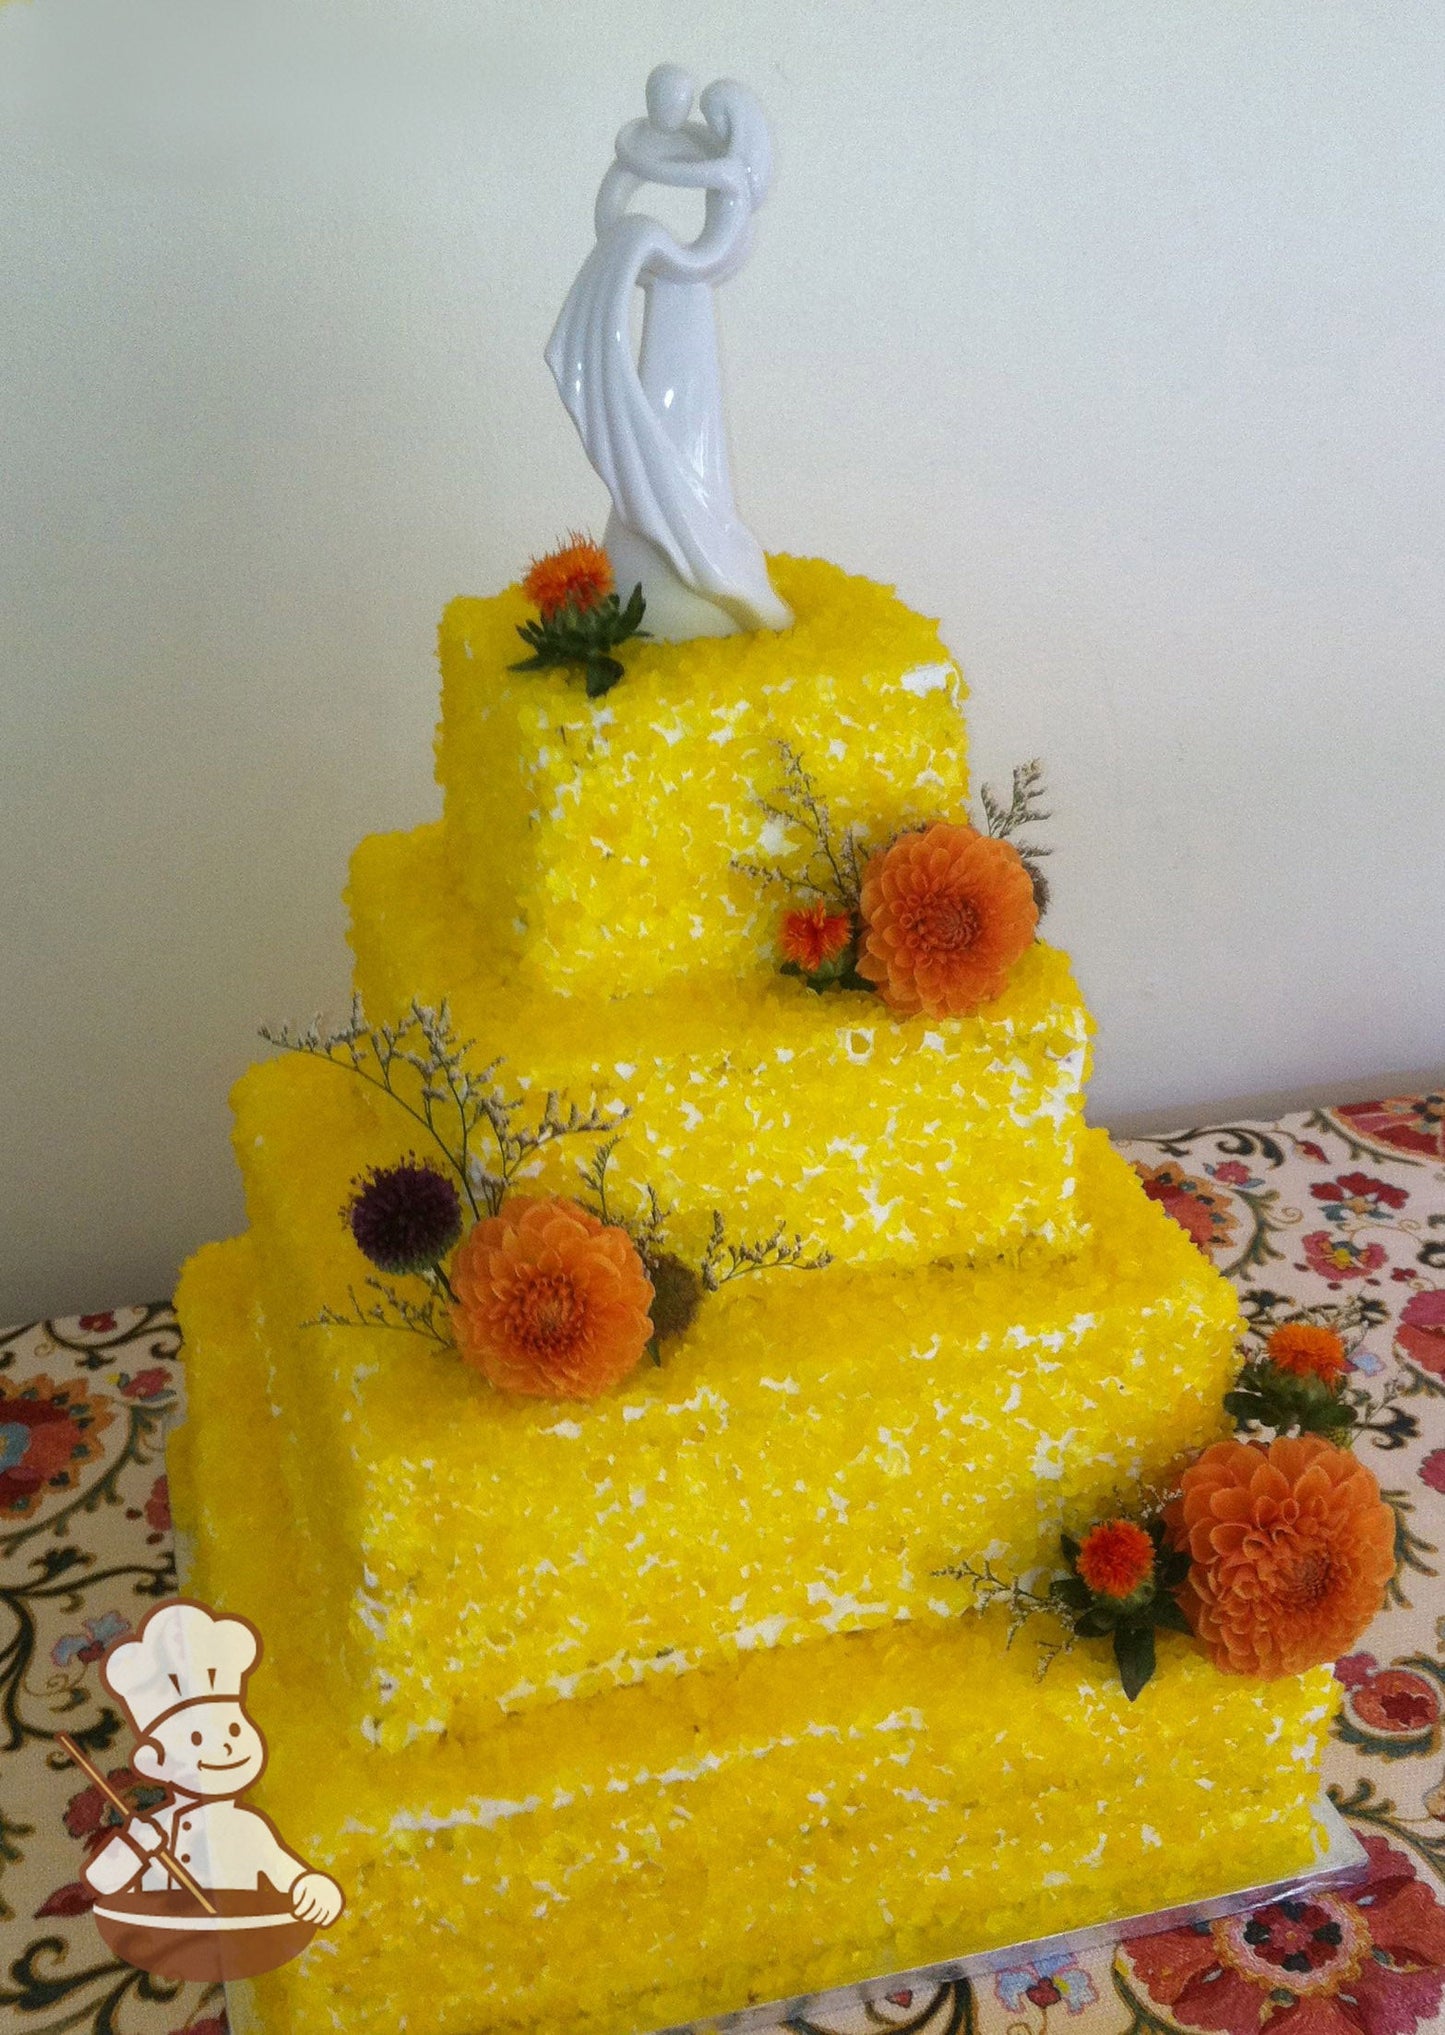 4-tier cake with white icing and sugar candy that look like shimmery rocks in a yellow color.